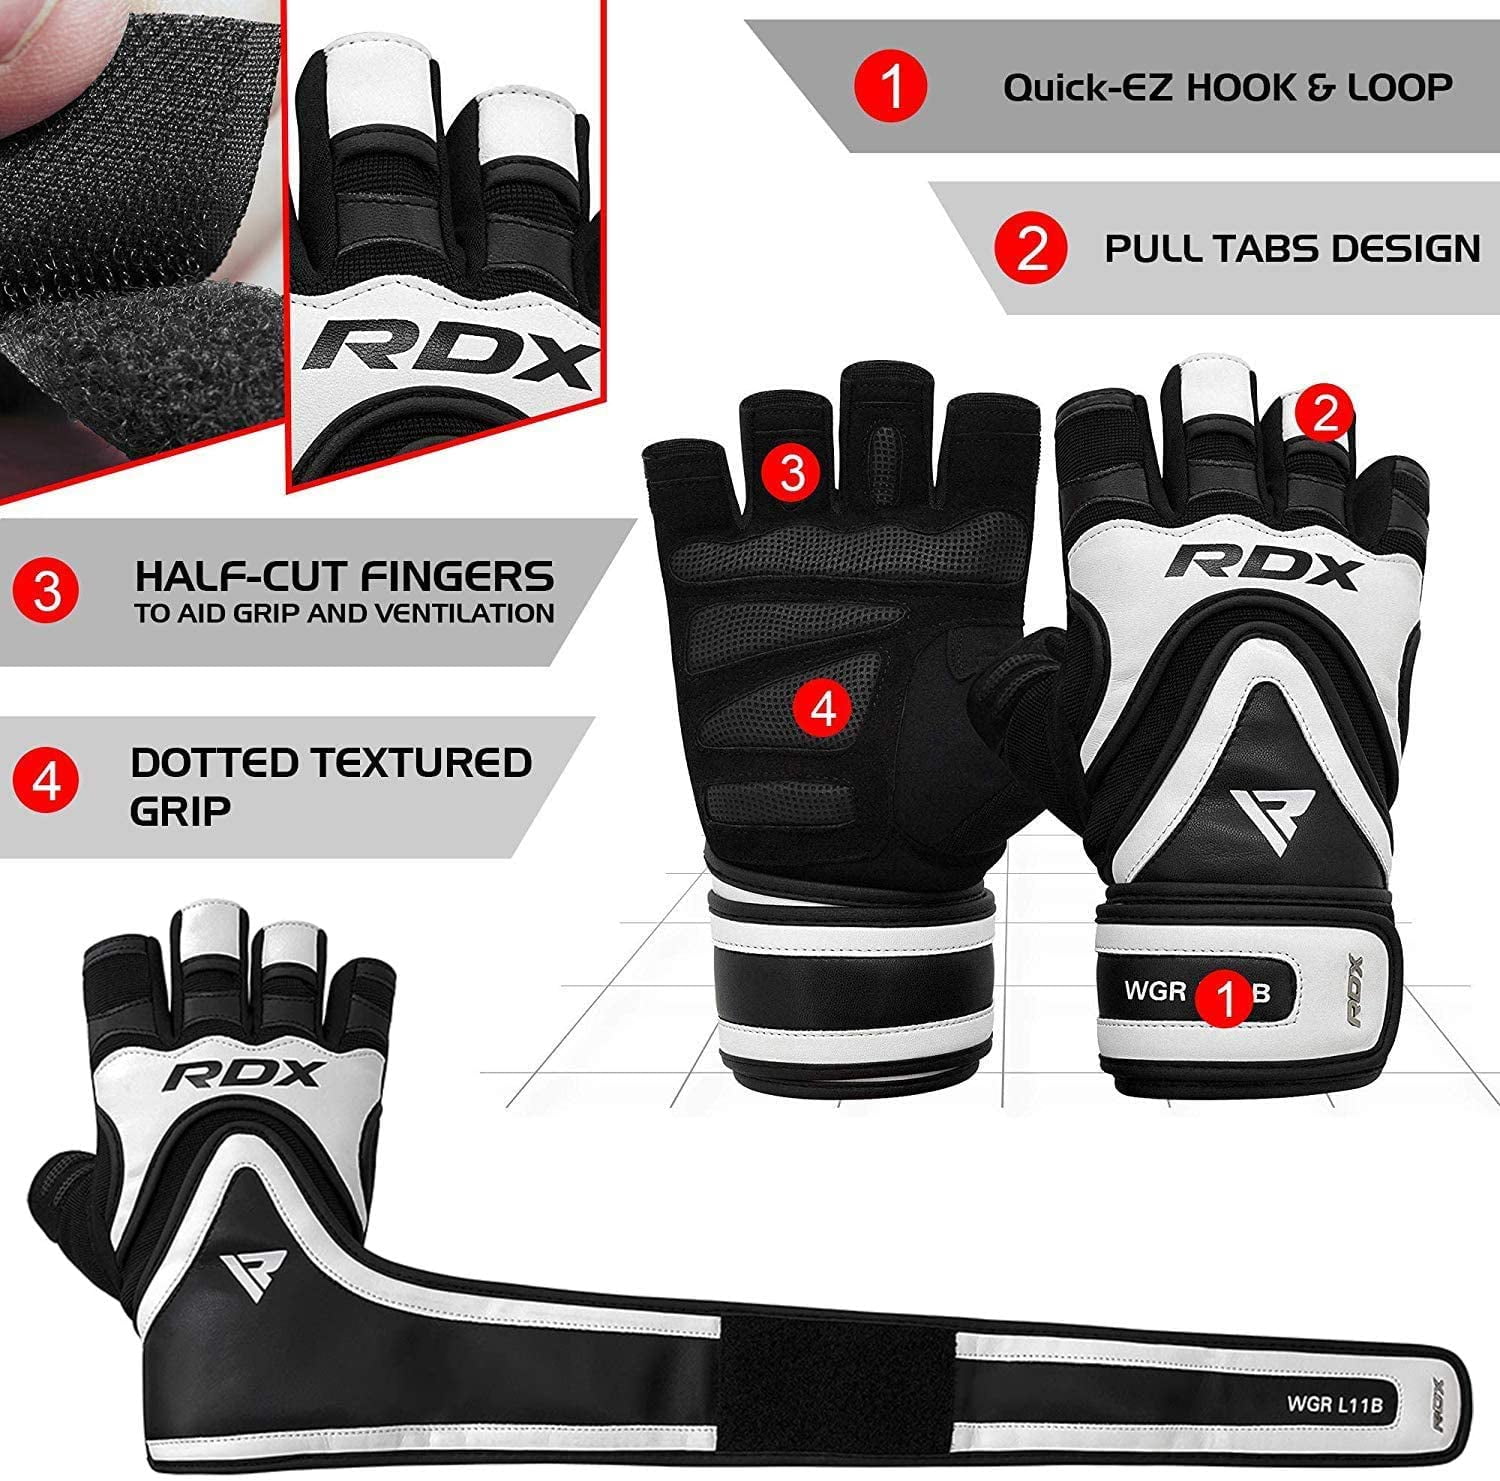 Strength Training RDX Weight Lifting Gloves for Gym Workout Weightlifting Bodybuilding Powerlifting Long Wrist Support Strap with Anti Slip Palm Protection Exercise Great Grip for Fitness